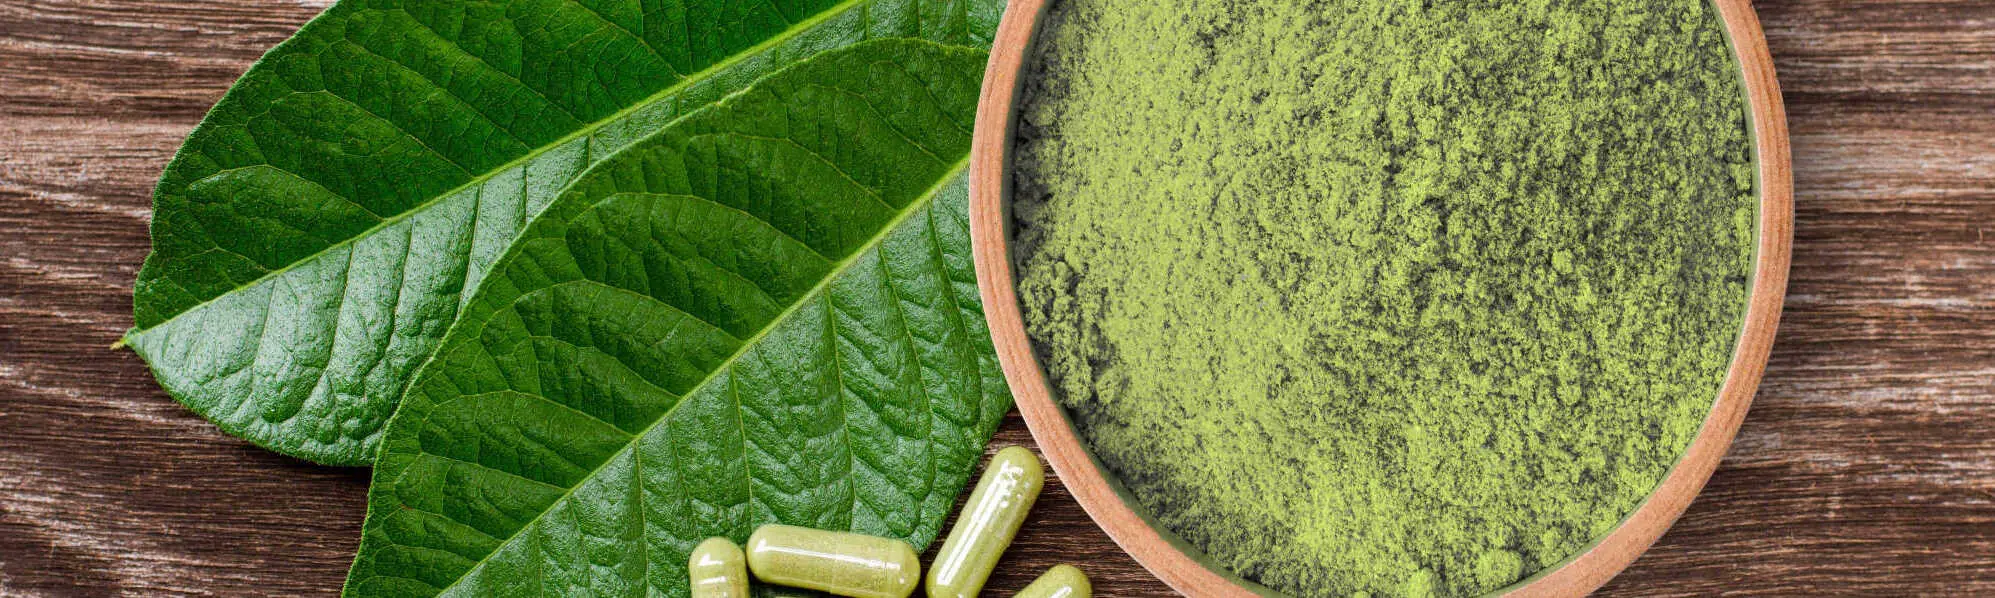 products-of-exclusive-kratom